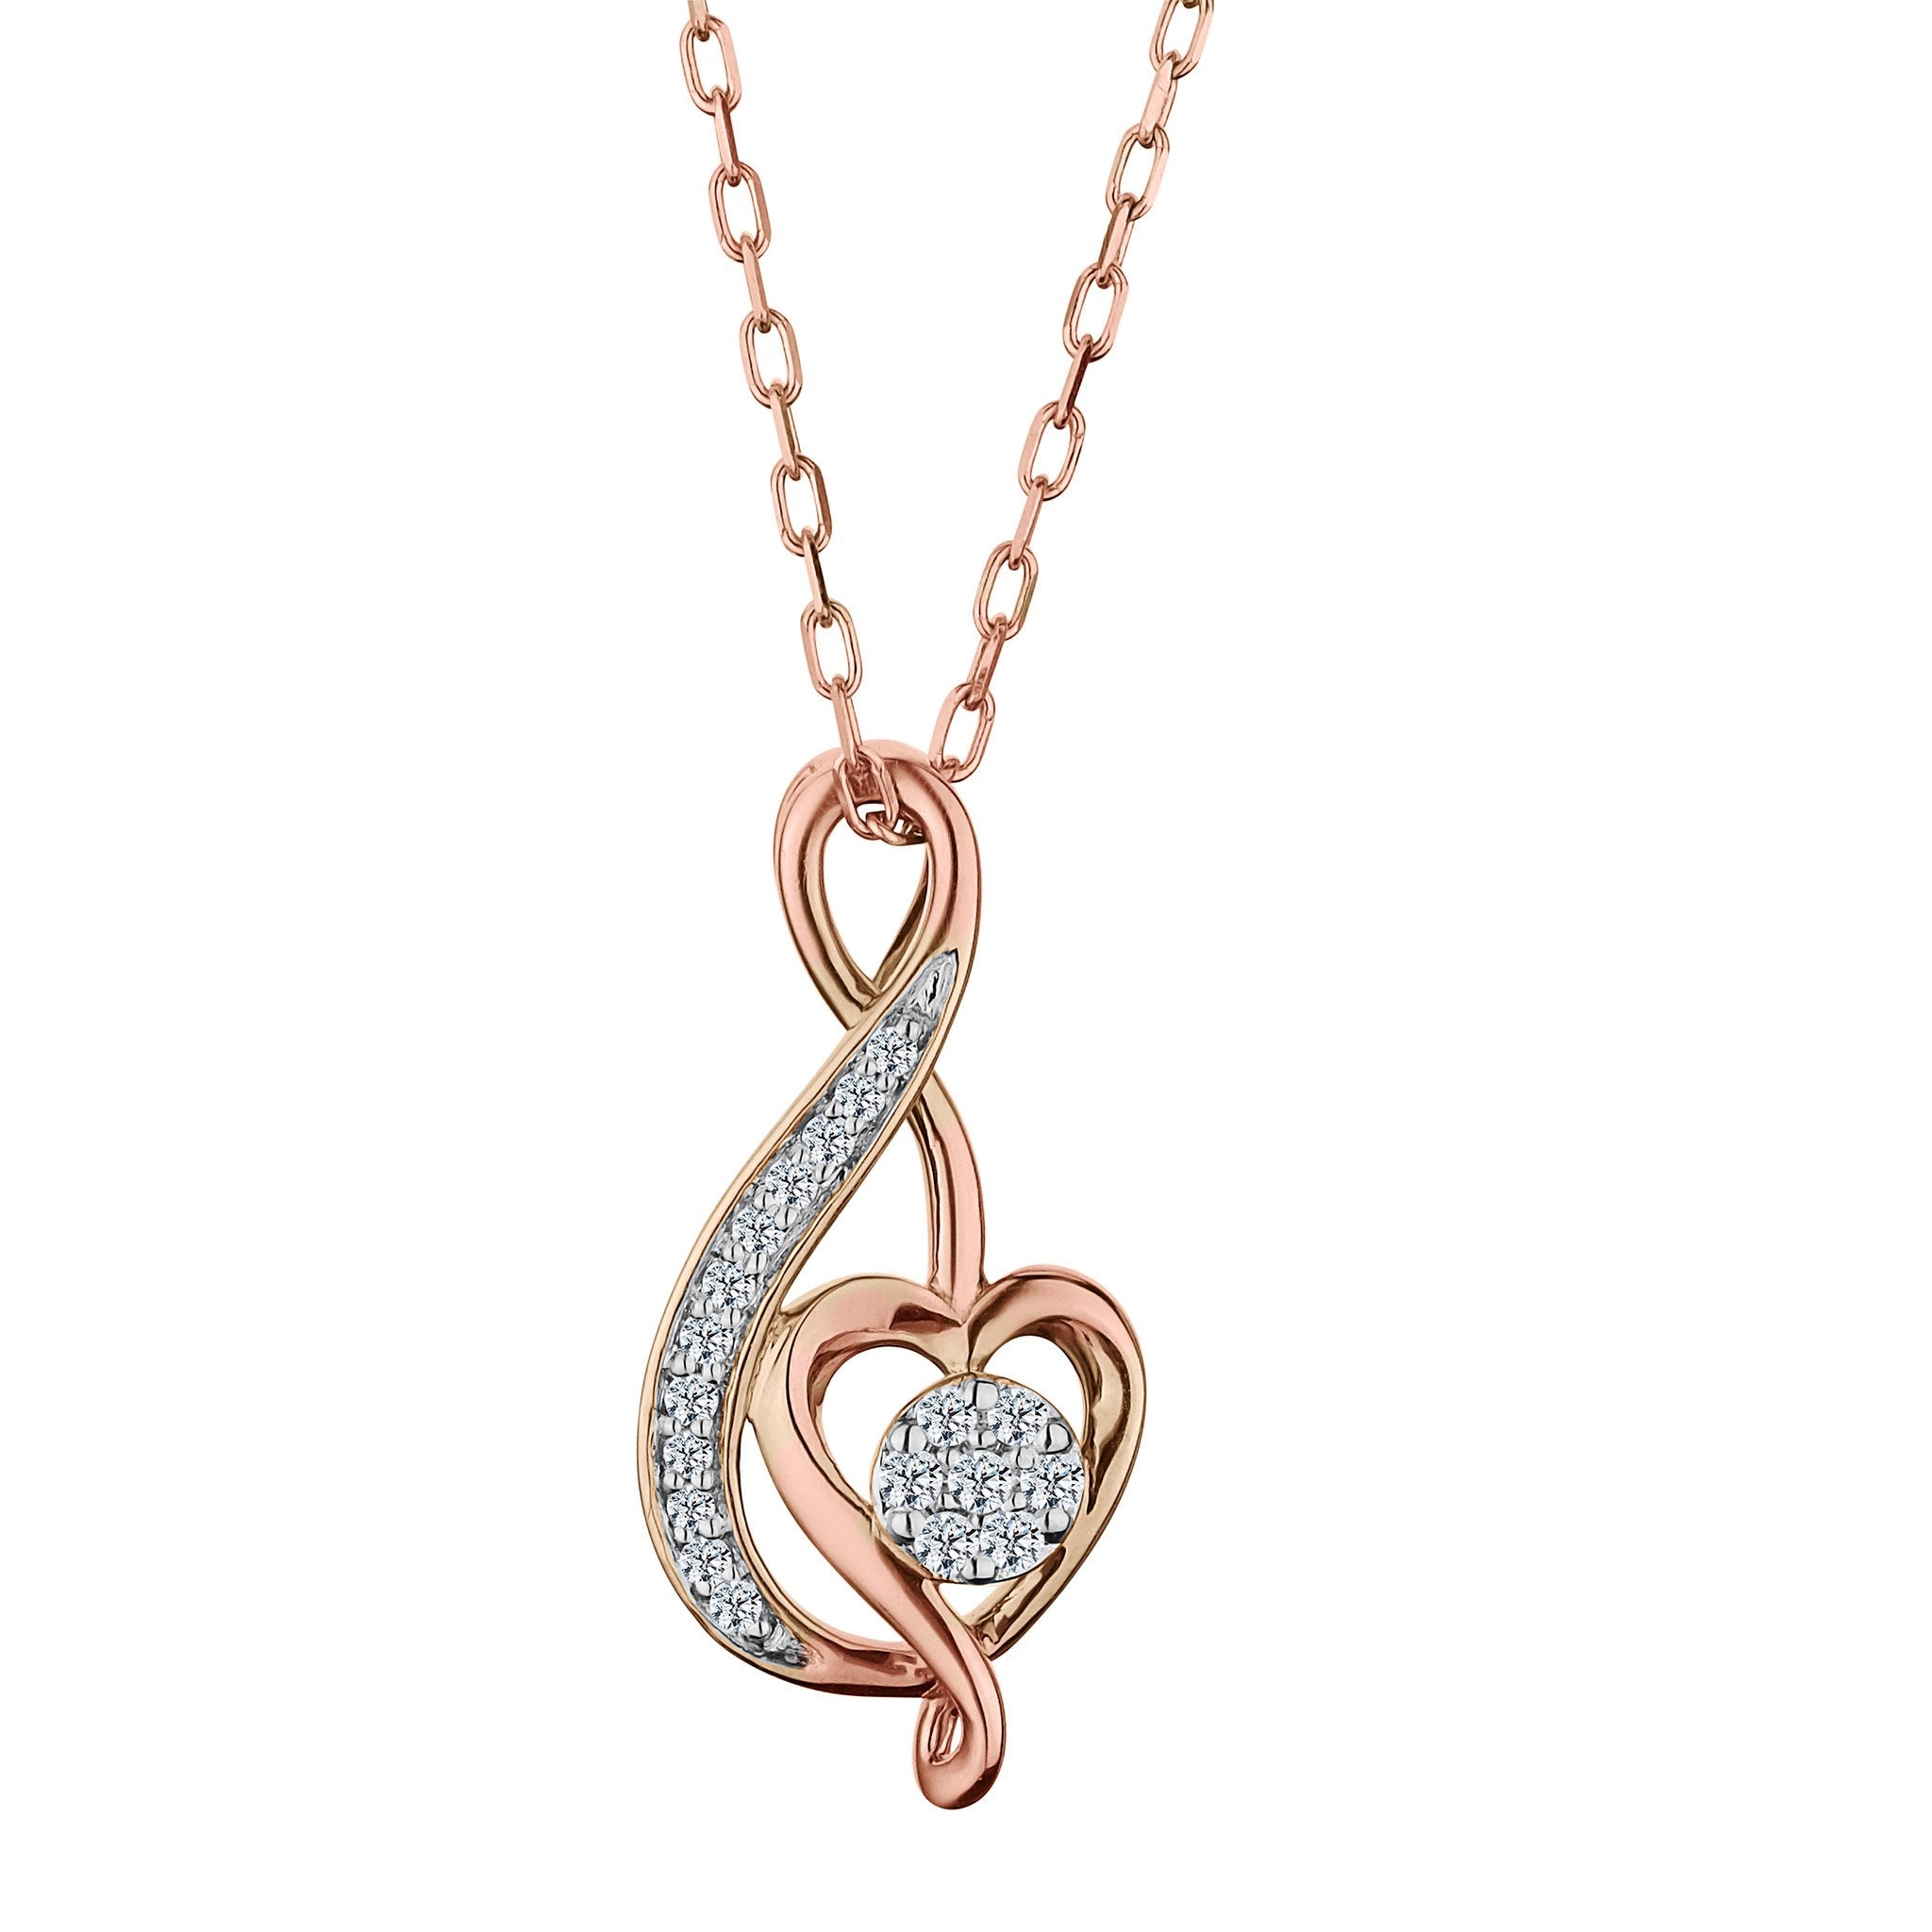 .10 Carat "Musical Note and Heart" Diamond Pendant,  10kt Rose Gold. Necklaces and Pendants. Griffin Jewellery Designs.